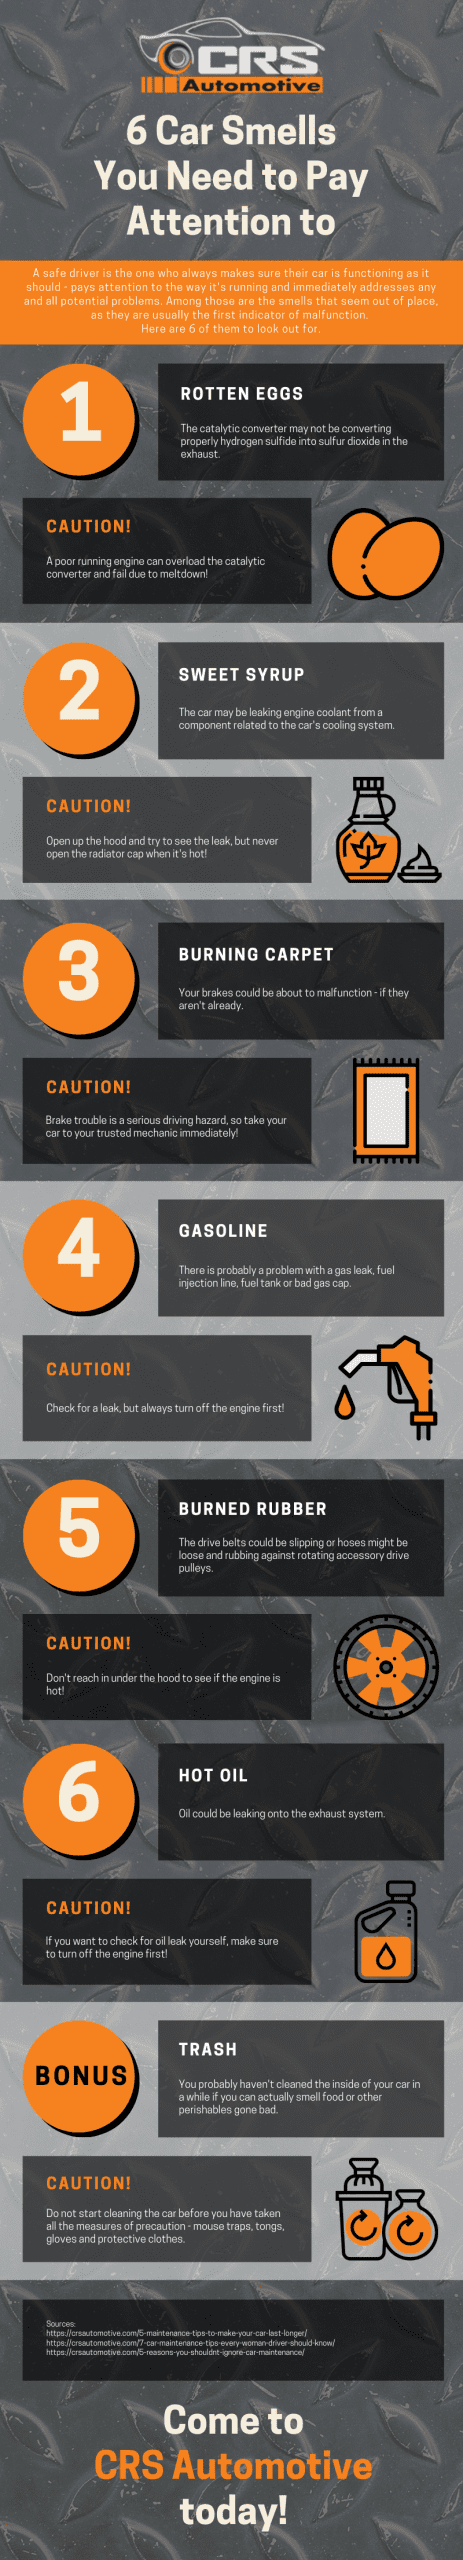 6 Car Smells You Need to Pay Attention to infographic